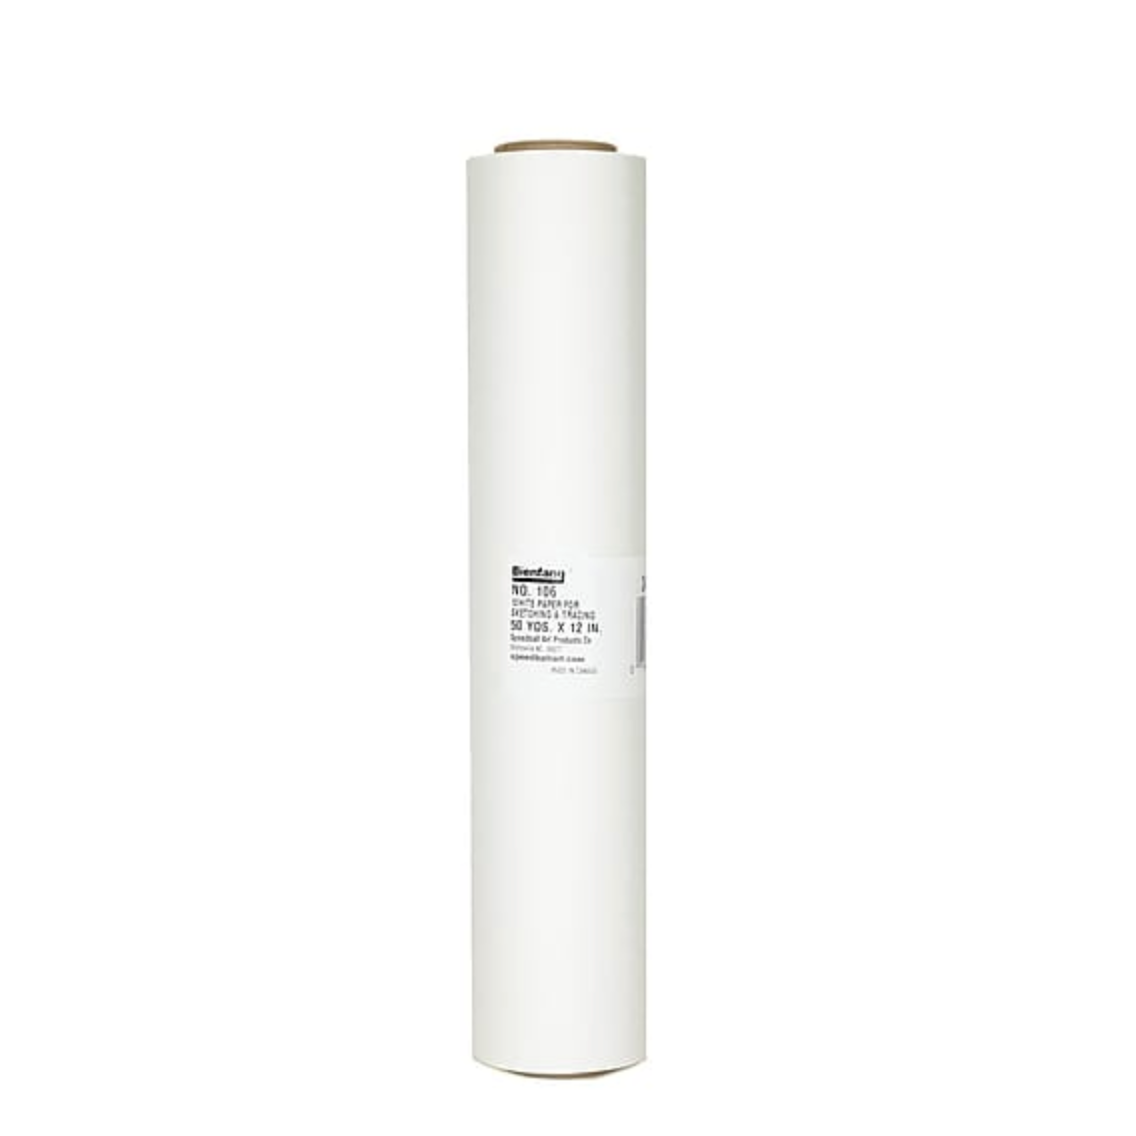 Bienfang (106) White Sketching and Tracing Paper Roll - by Bienfang - K. A. Artist Shop